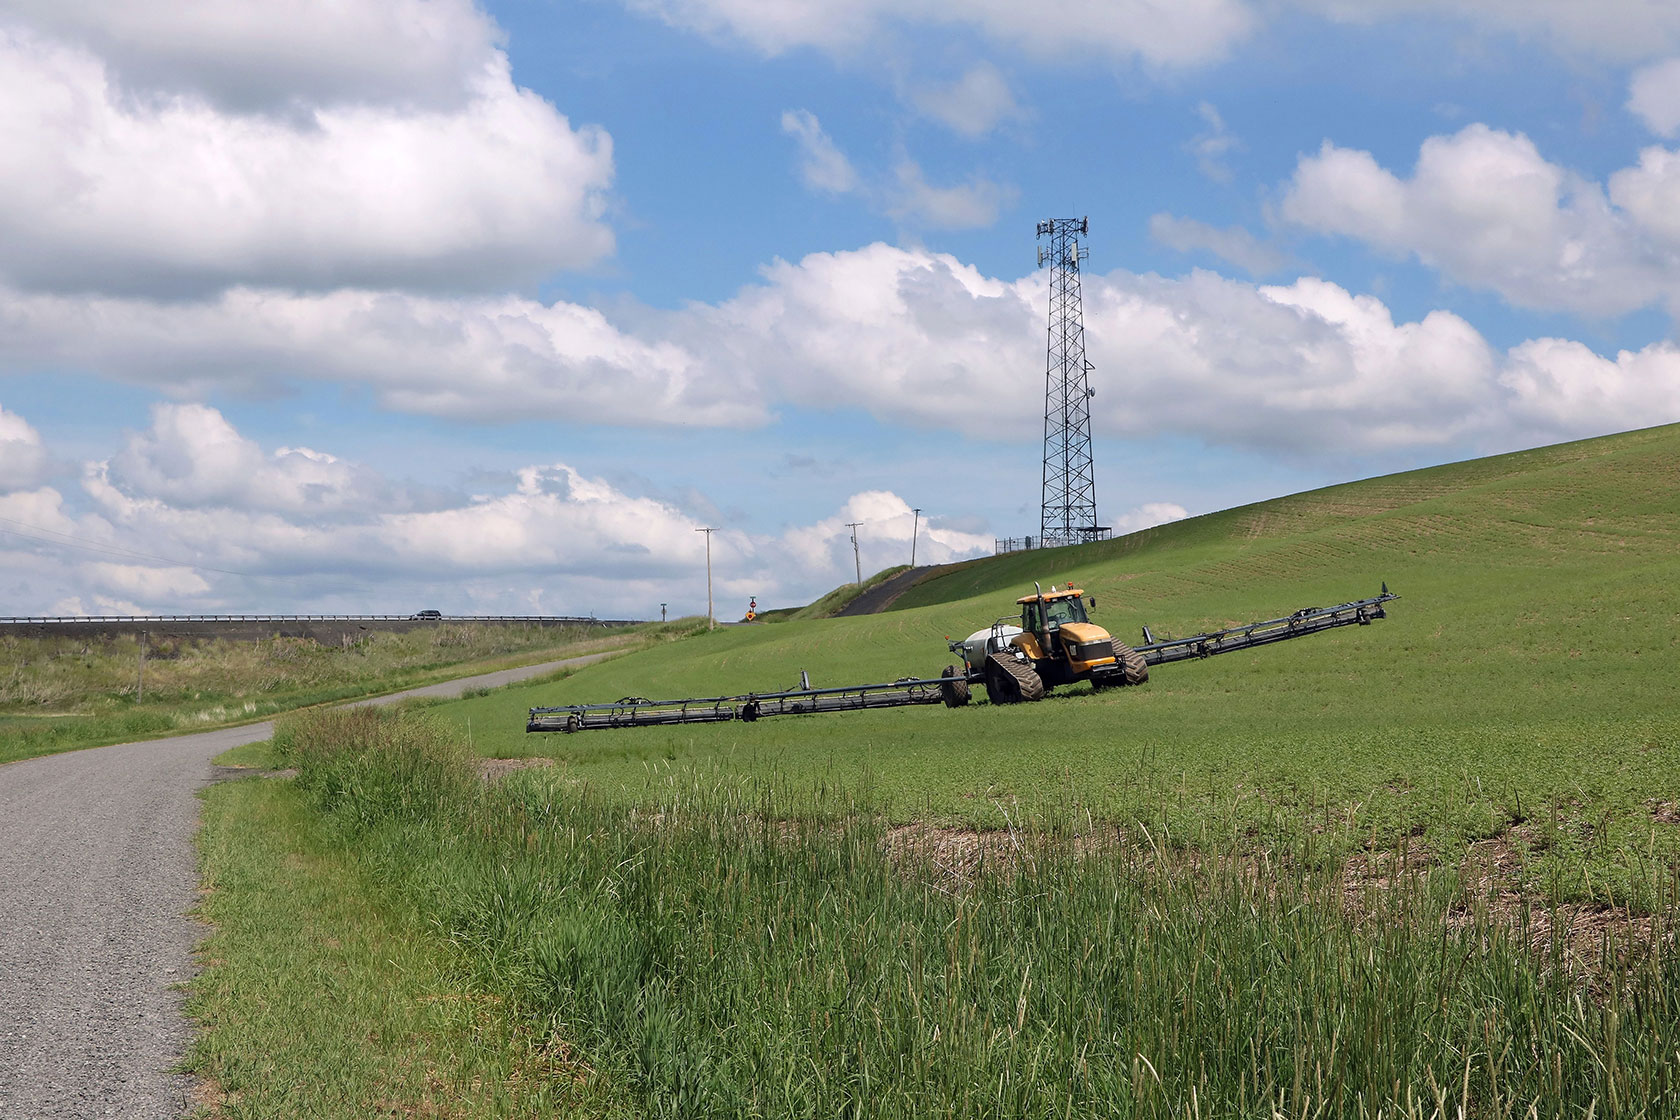 A farmer tends to crops in front of a cell tower.